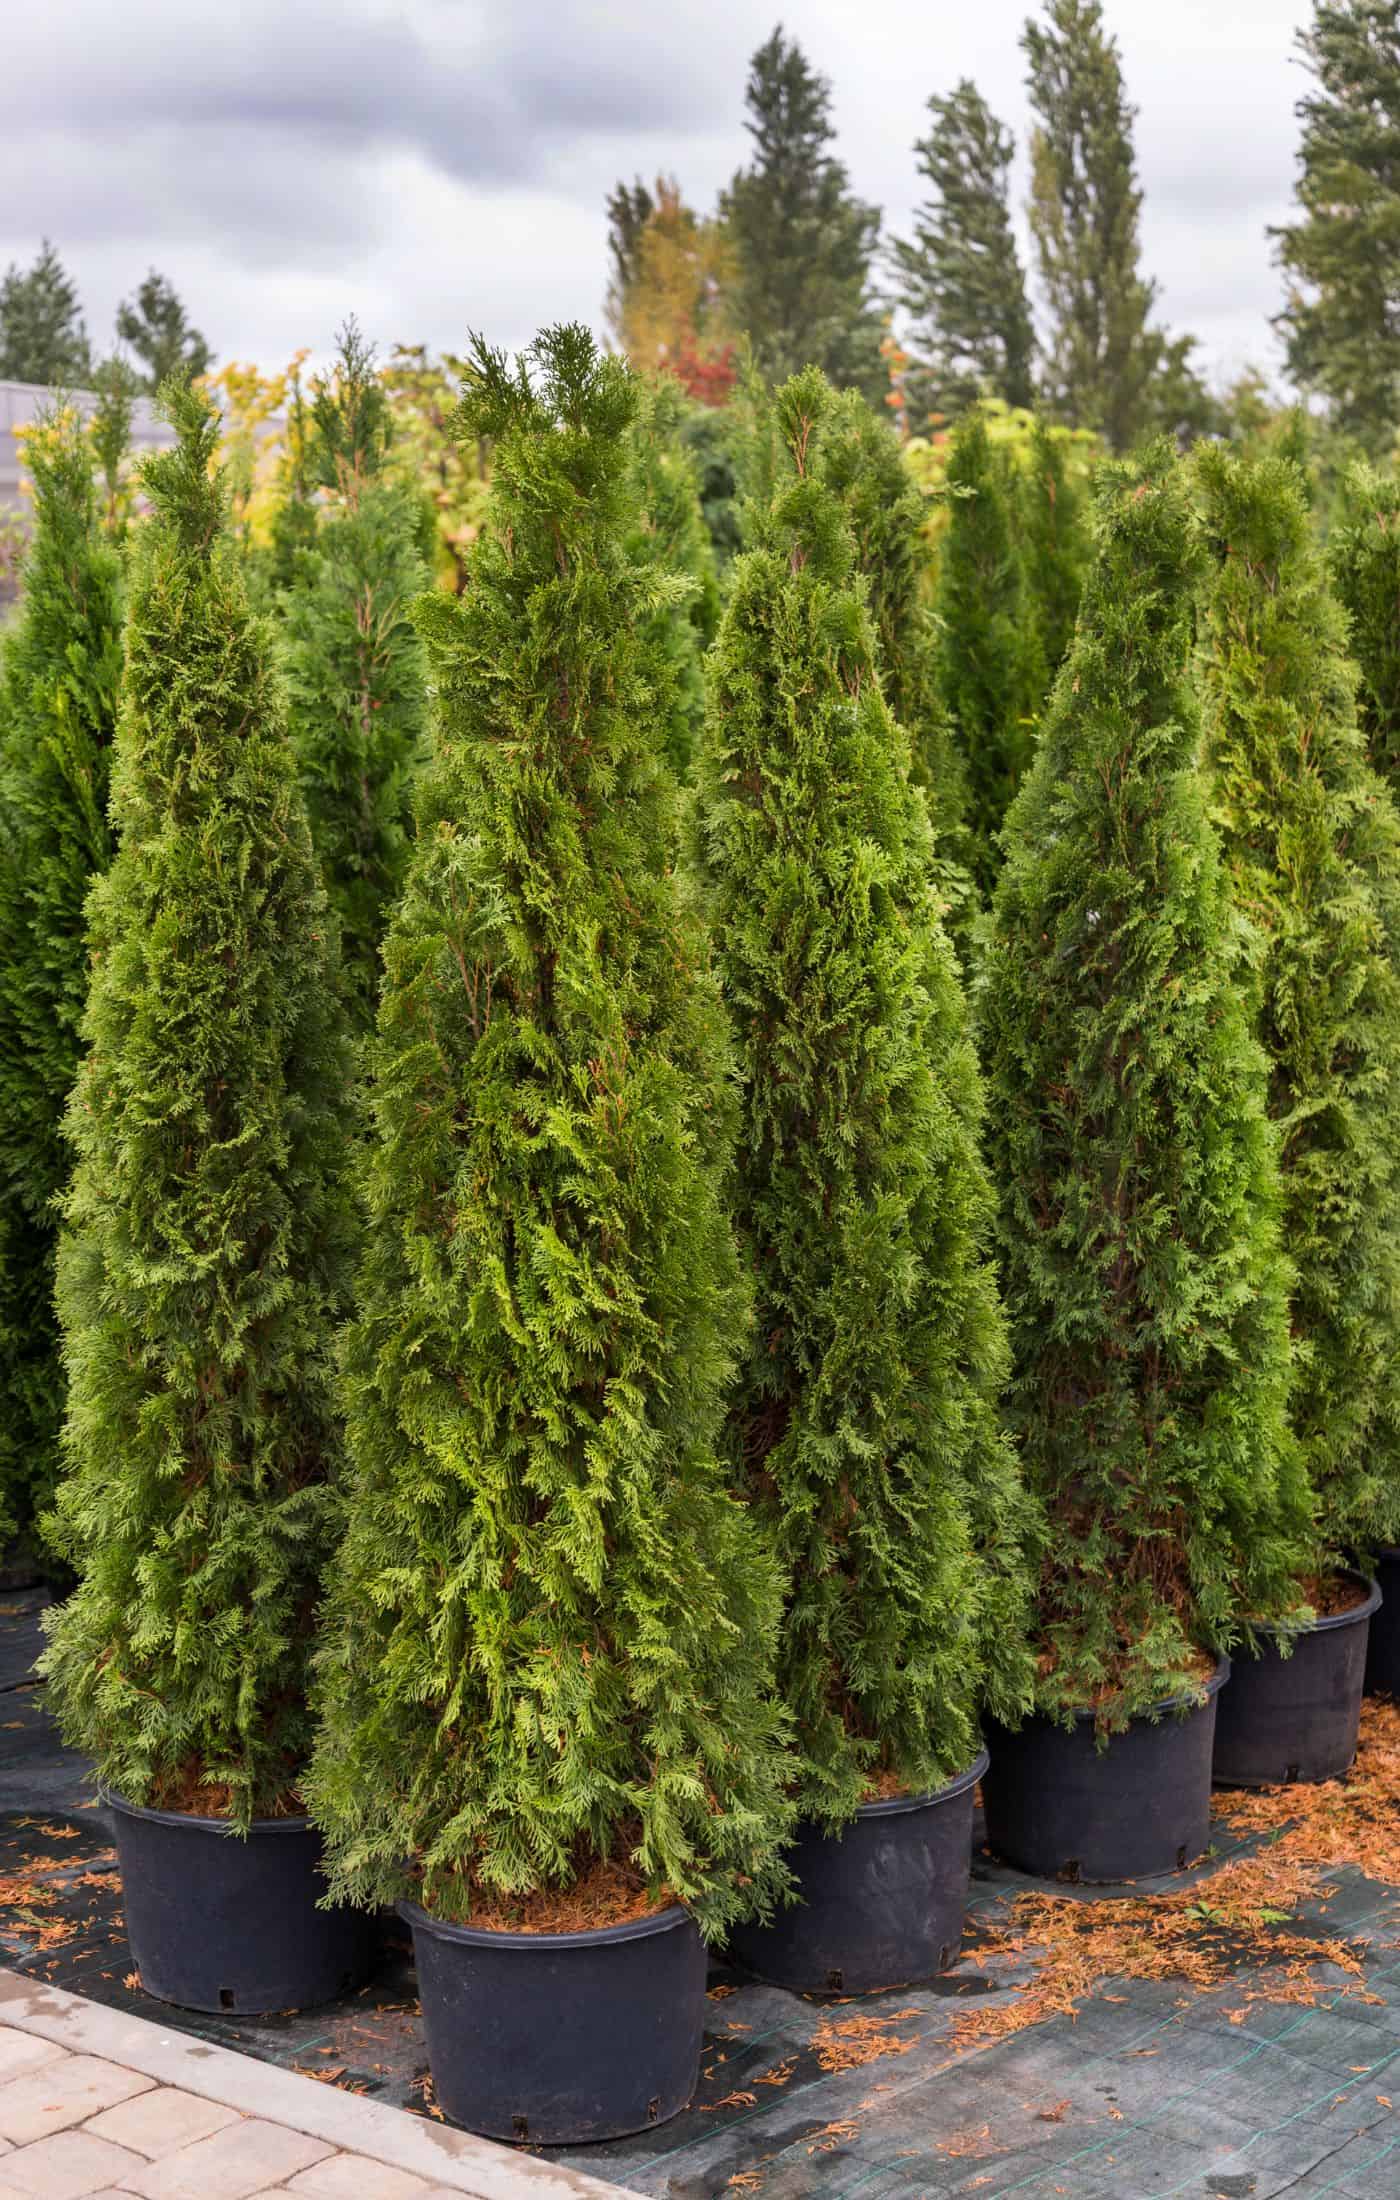 Arborvitae trees in pots at the nursery